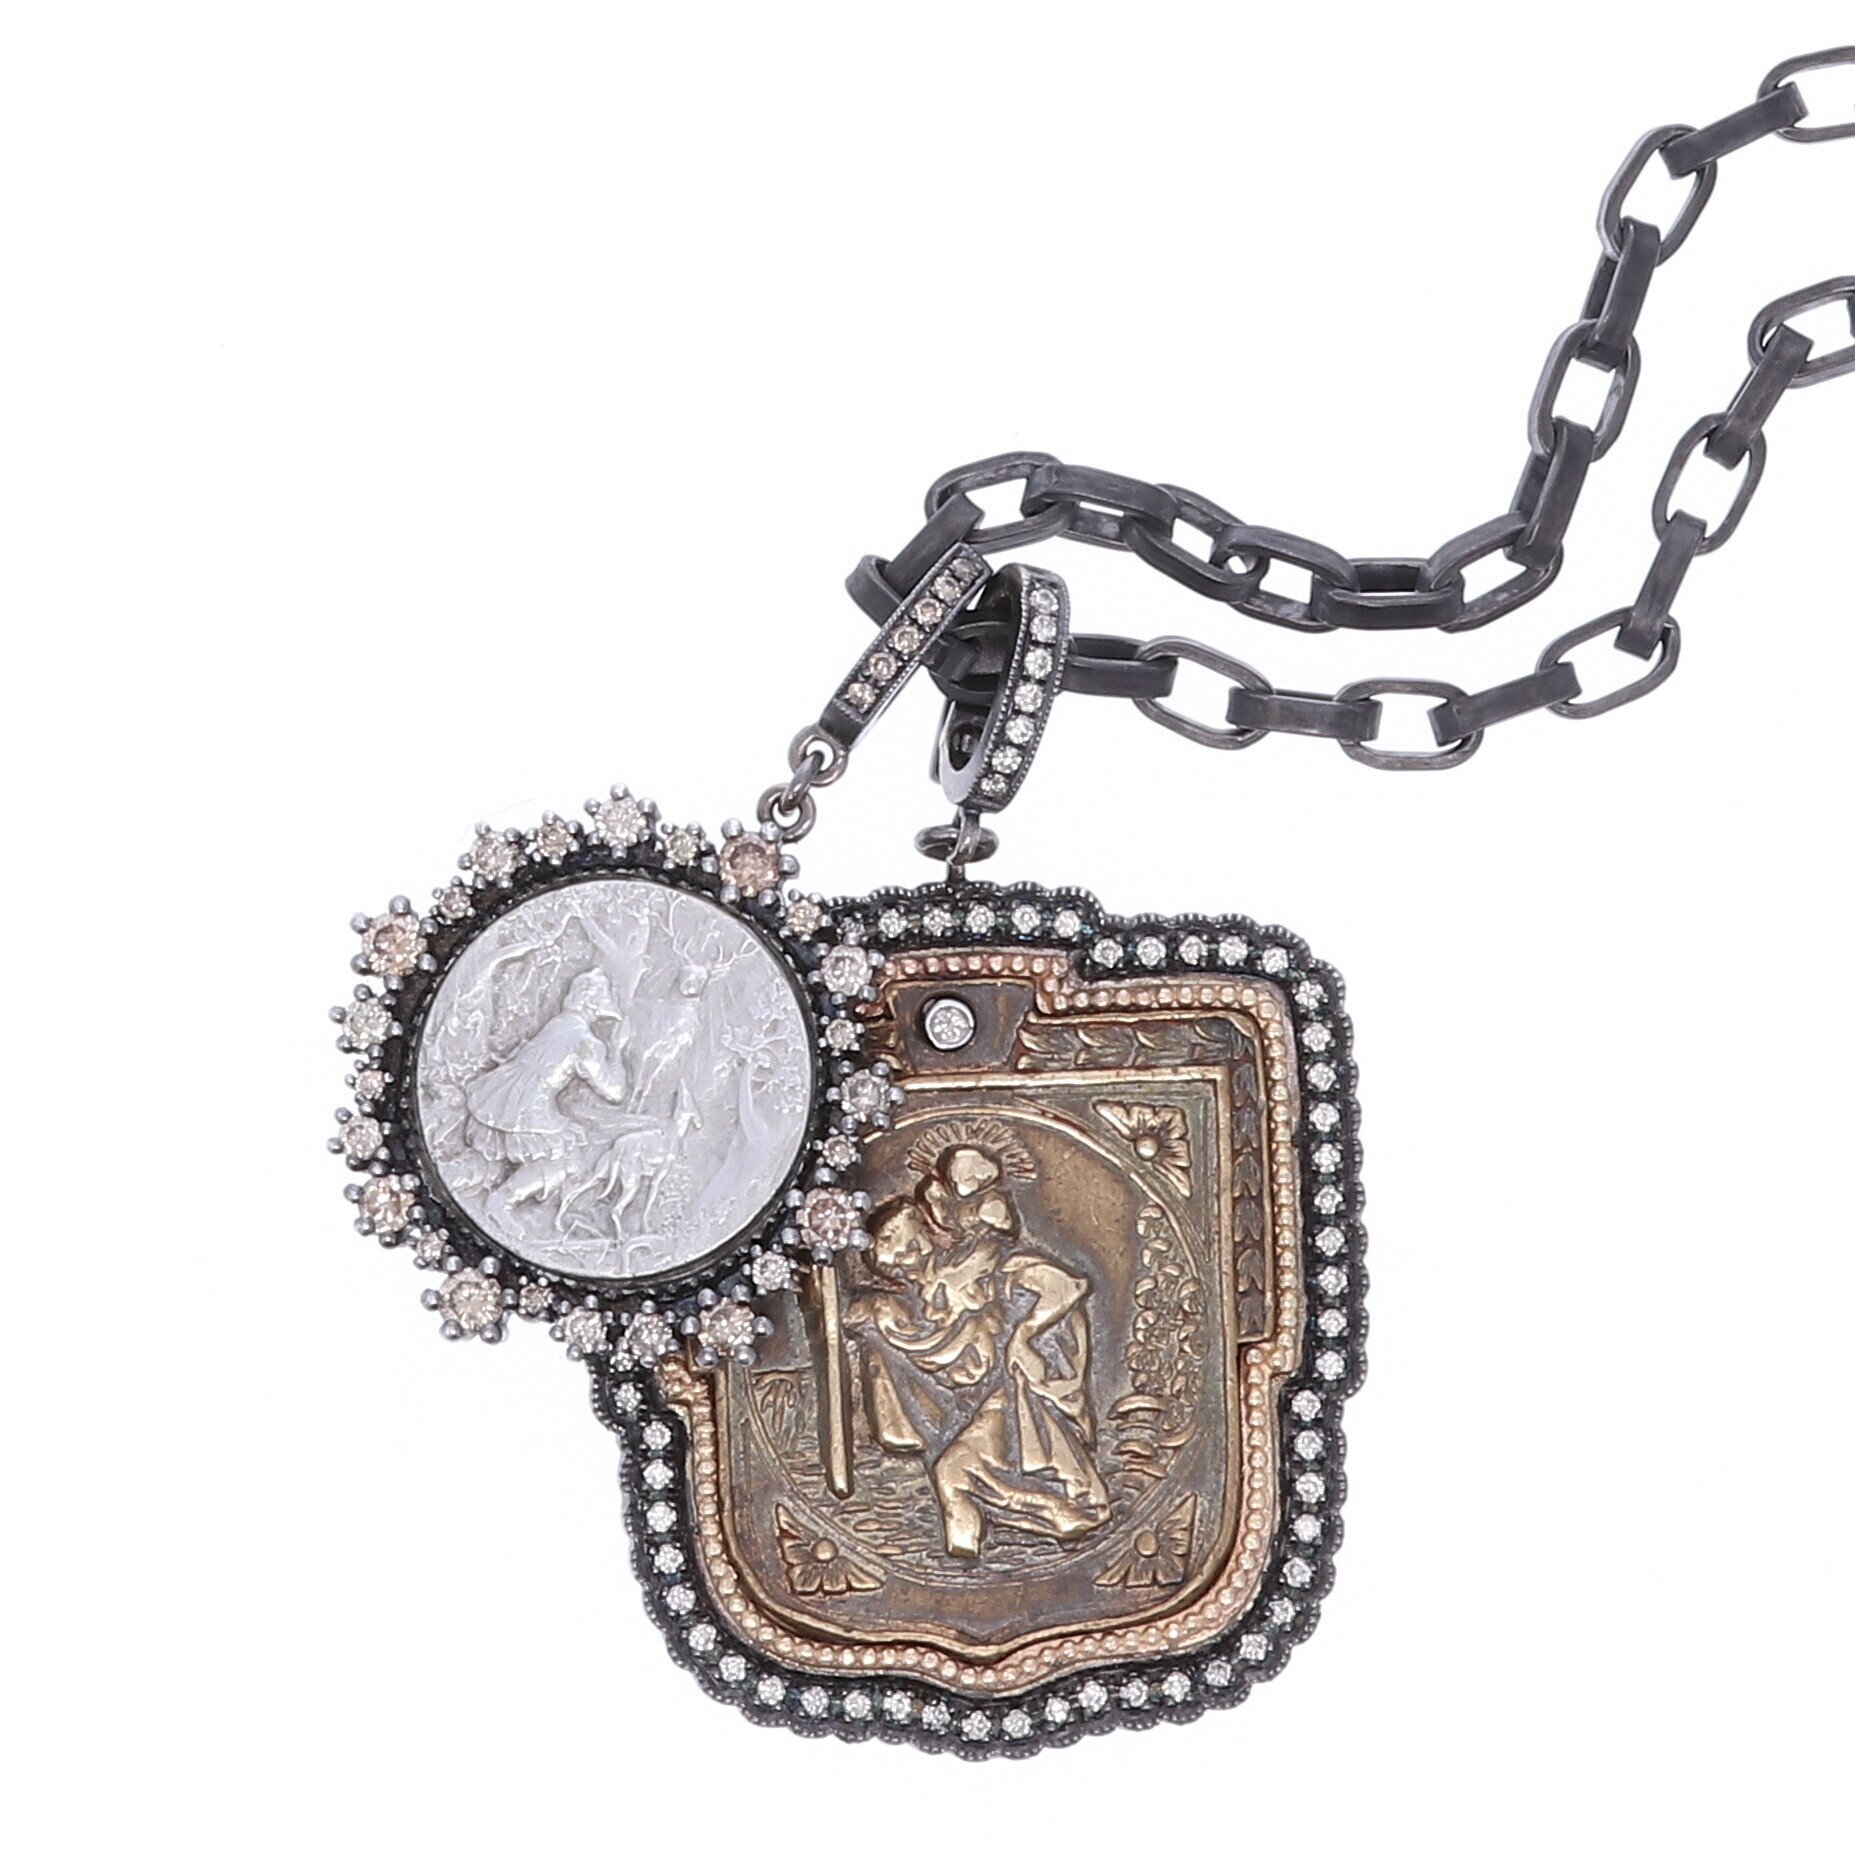 Antique St. Christopher "The Gentle Giant in The River" Pendant